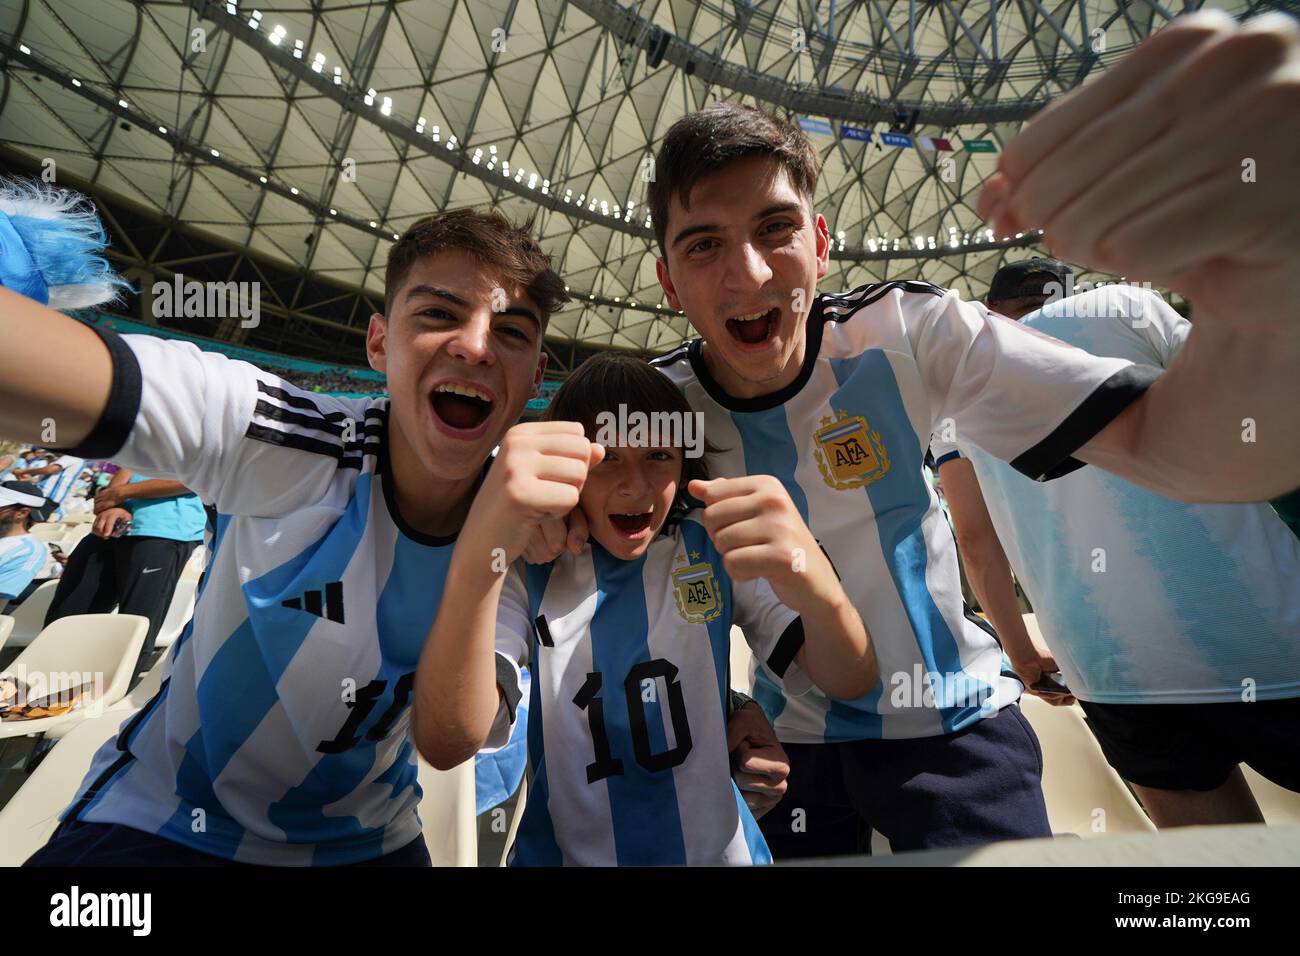 LUSAIL, QATAR - NOVEMBER 22: Supporters of Argentina poses for a photo prior to the 2022 FIFA World Cup Qatar group C between Argentina and Saudi Arabia at Lusail Stadium on November 22, 2022 in Lusail, Qatar. (Photo by Florencia Tan Jun/PxImages) Stock Photo